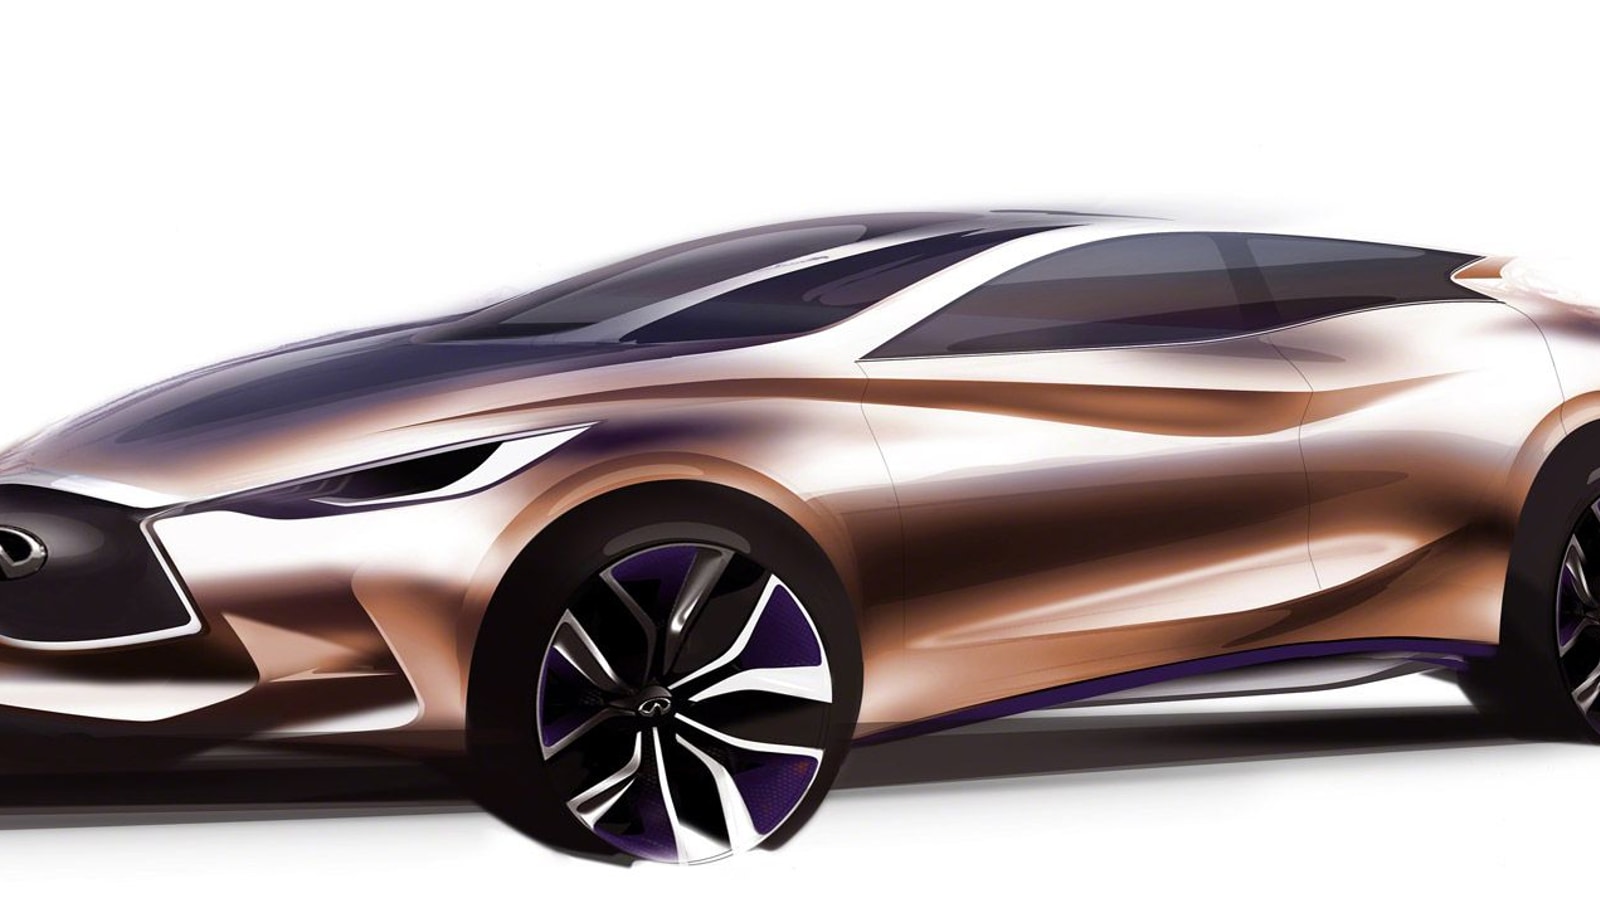 Preview sketch of Infiniti's new Q30 concept